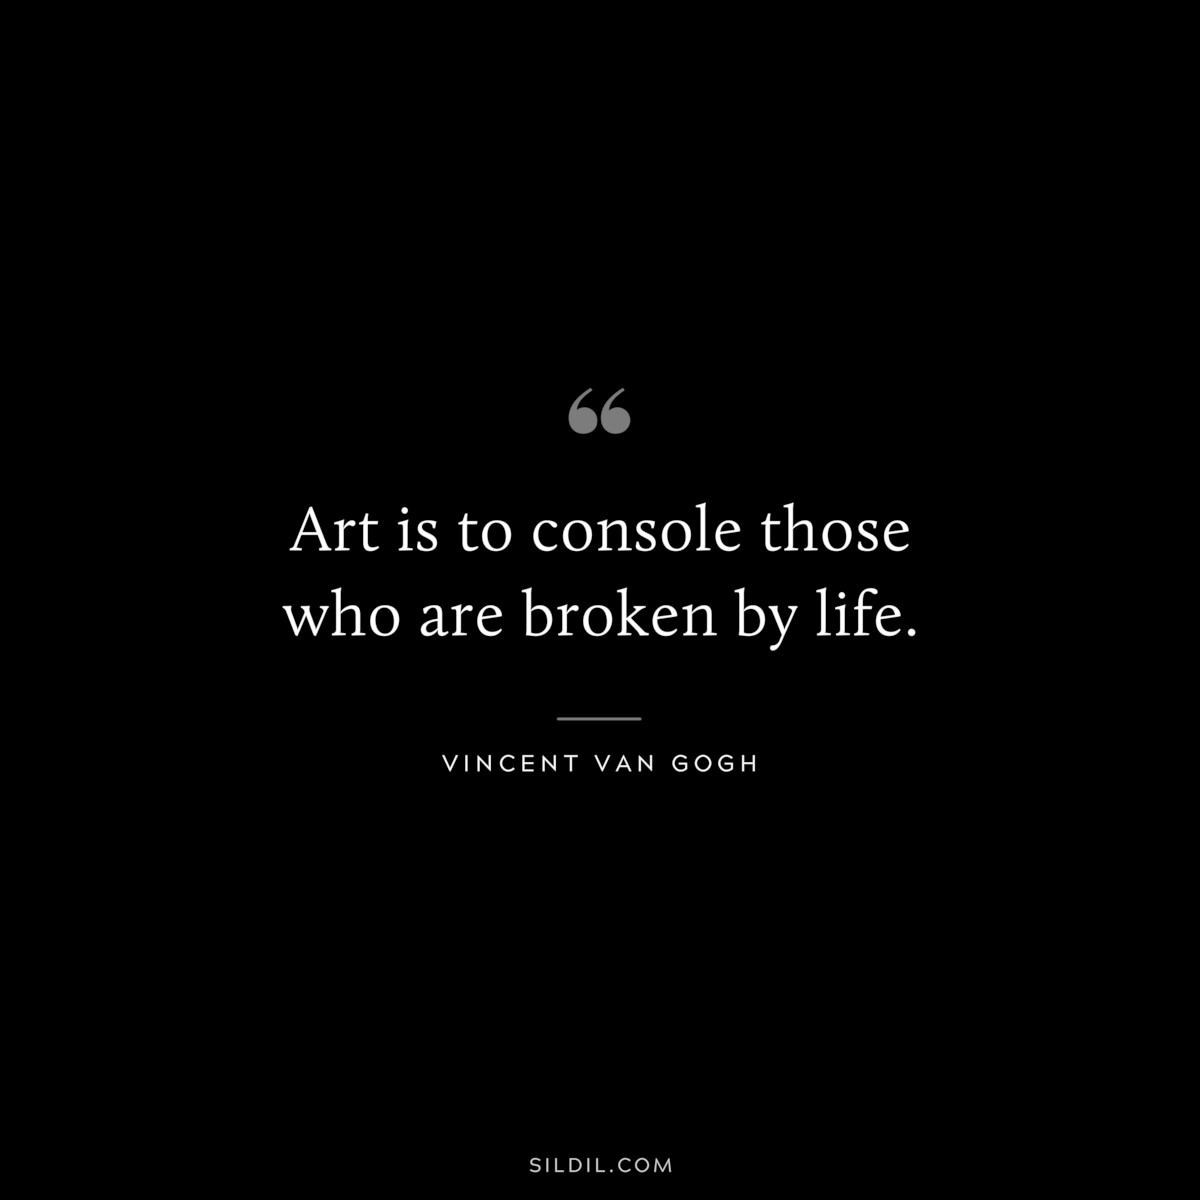 Art is to console those who are broken by life. ― Vincent van Gogh